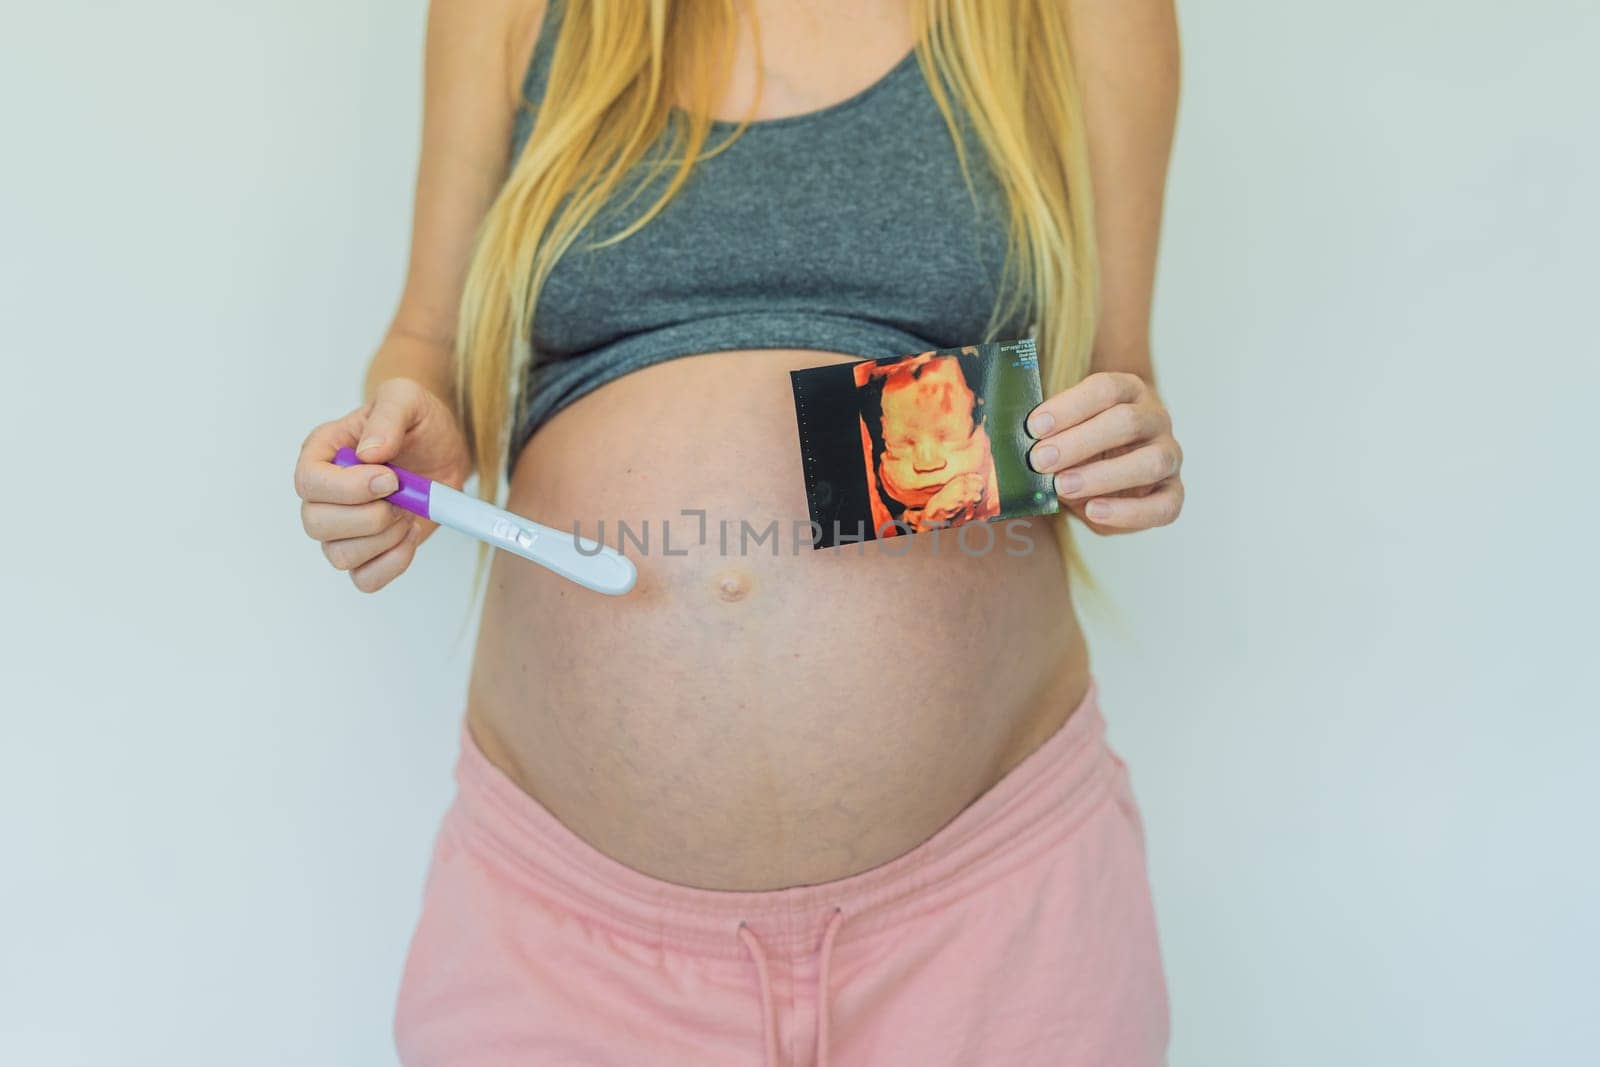 Joyful pregnant woman shares the exciting news, proudly displaying her positive pregnancy test and a heartwarming ultrasound photo by galitskaya